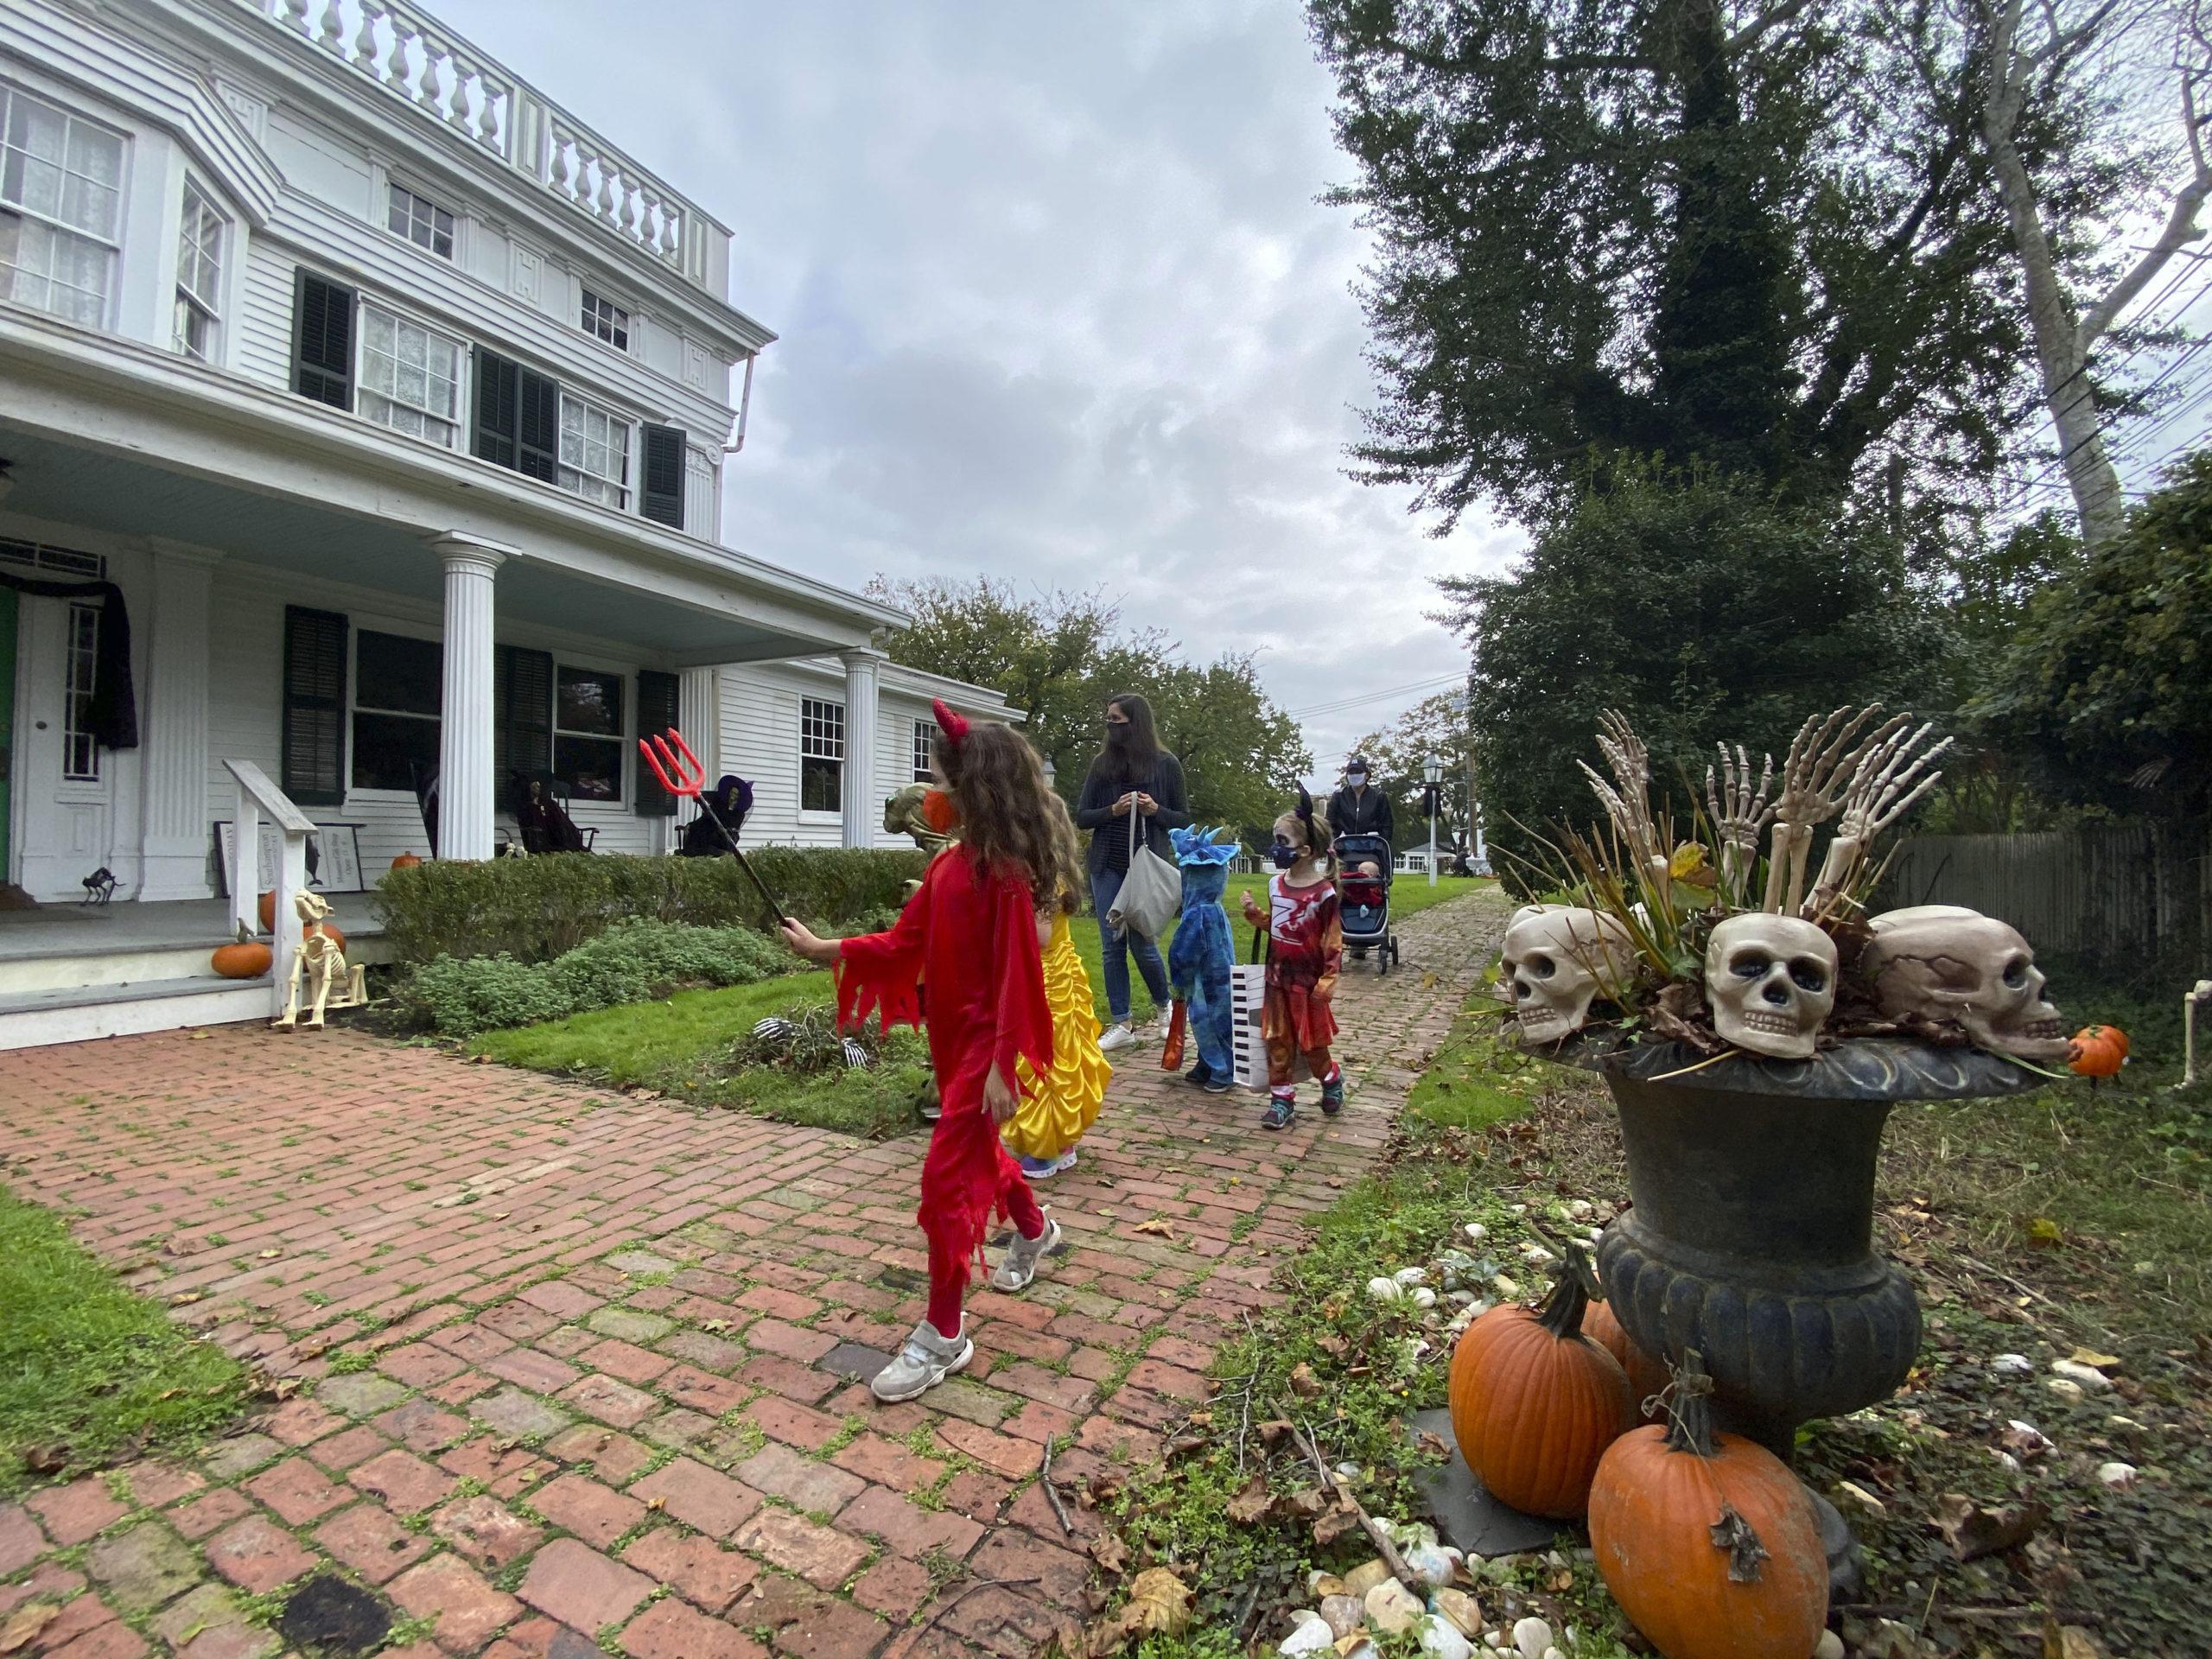 Children visit the Haunted Village at the Southampton History Museum on Saturday. The grounds of the Rogers Mansion are decorated for Halloween and are inhabited by witches, ghouls and even a plague doctor. The Haunted Village will be opened on Saturday October 31 from 2 to 4 p.m. Visitors are encouraged to wear their costumes. Reservations required with timed entrances for a 20 minute tour. Limited to 100 people at one time, only family groups of up to 6 allowed per reservation. Children must be accompanied by an adult with a reservation. Facemasks required and social distancing strictly enforced. Call (631) 283-2494 or visit southamptonhistory.org for more information. DANA SHAW